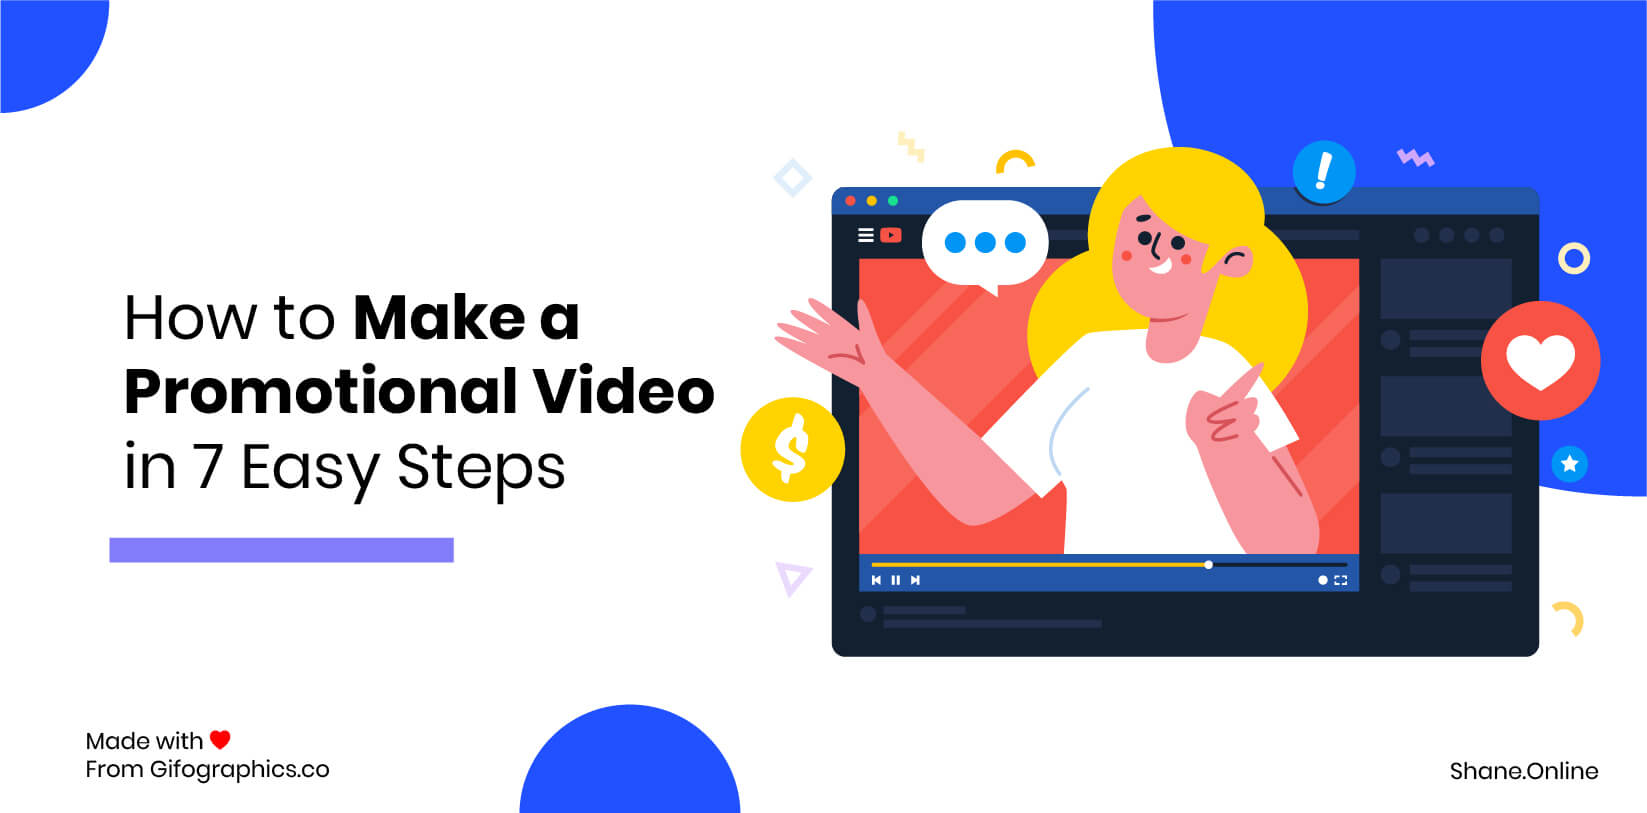 How to Make a Promotional Video in 7 Easy Steps